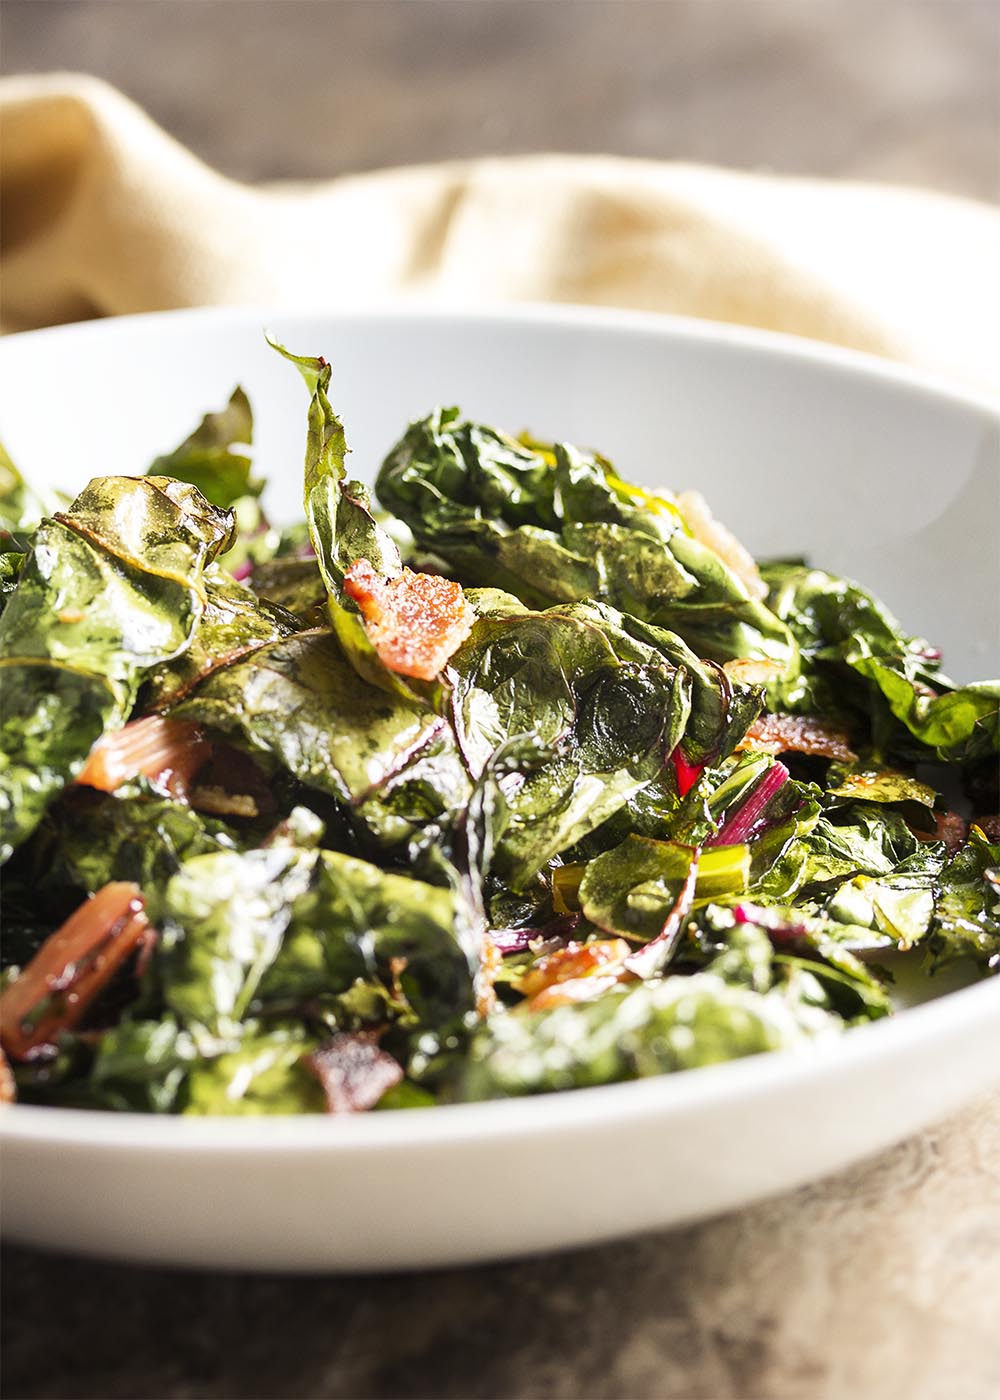 Swiss Chard Chips - Don't know what to do with chard? Family won't eat it? Try this recipe where Swiss chard leaves are tossed in bacon fat and baked to crispness to make addictively yummy chard chips. | justalittlebitofbacon.com